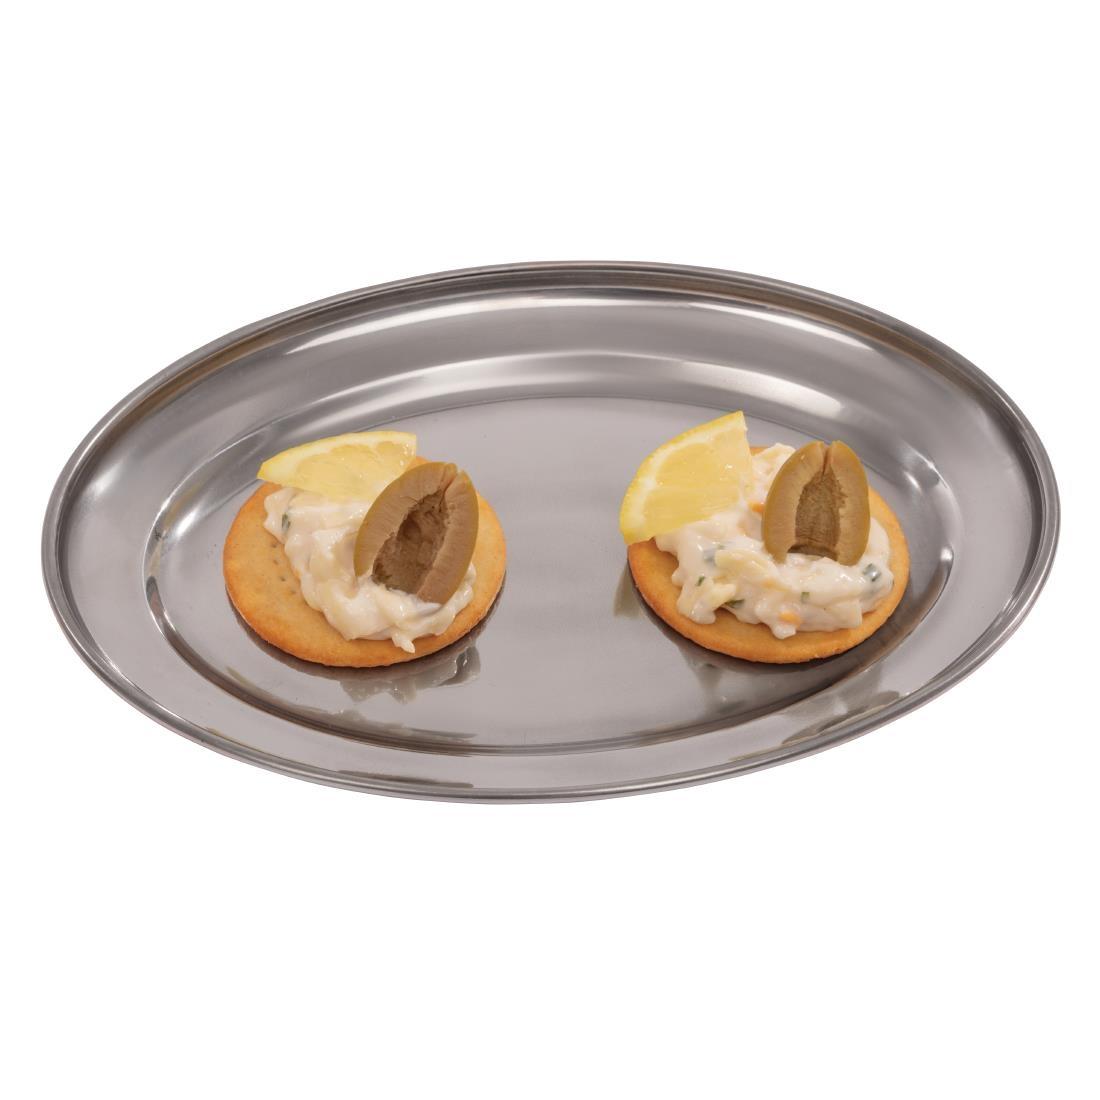 Olympia Stainless Steel Oval Serving Tray 200mm - K360  - 3